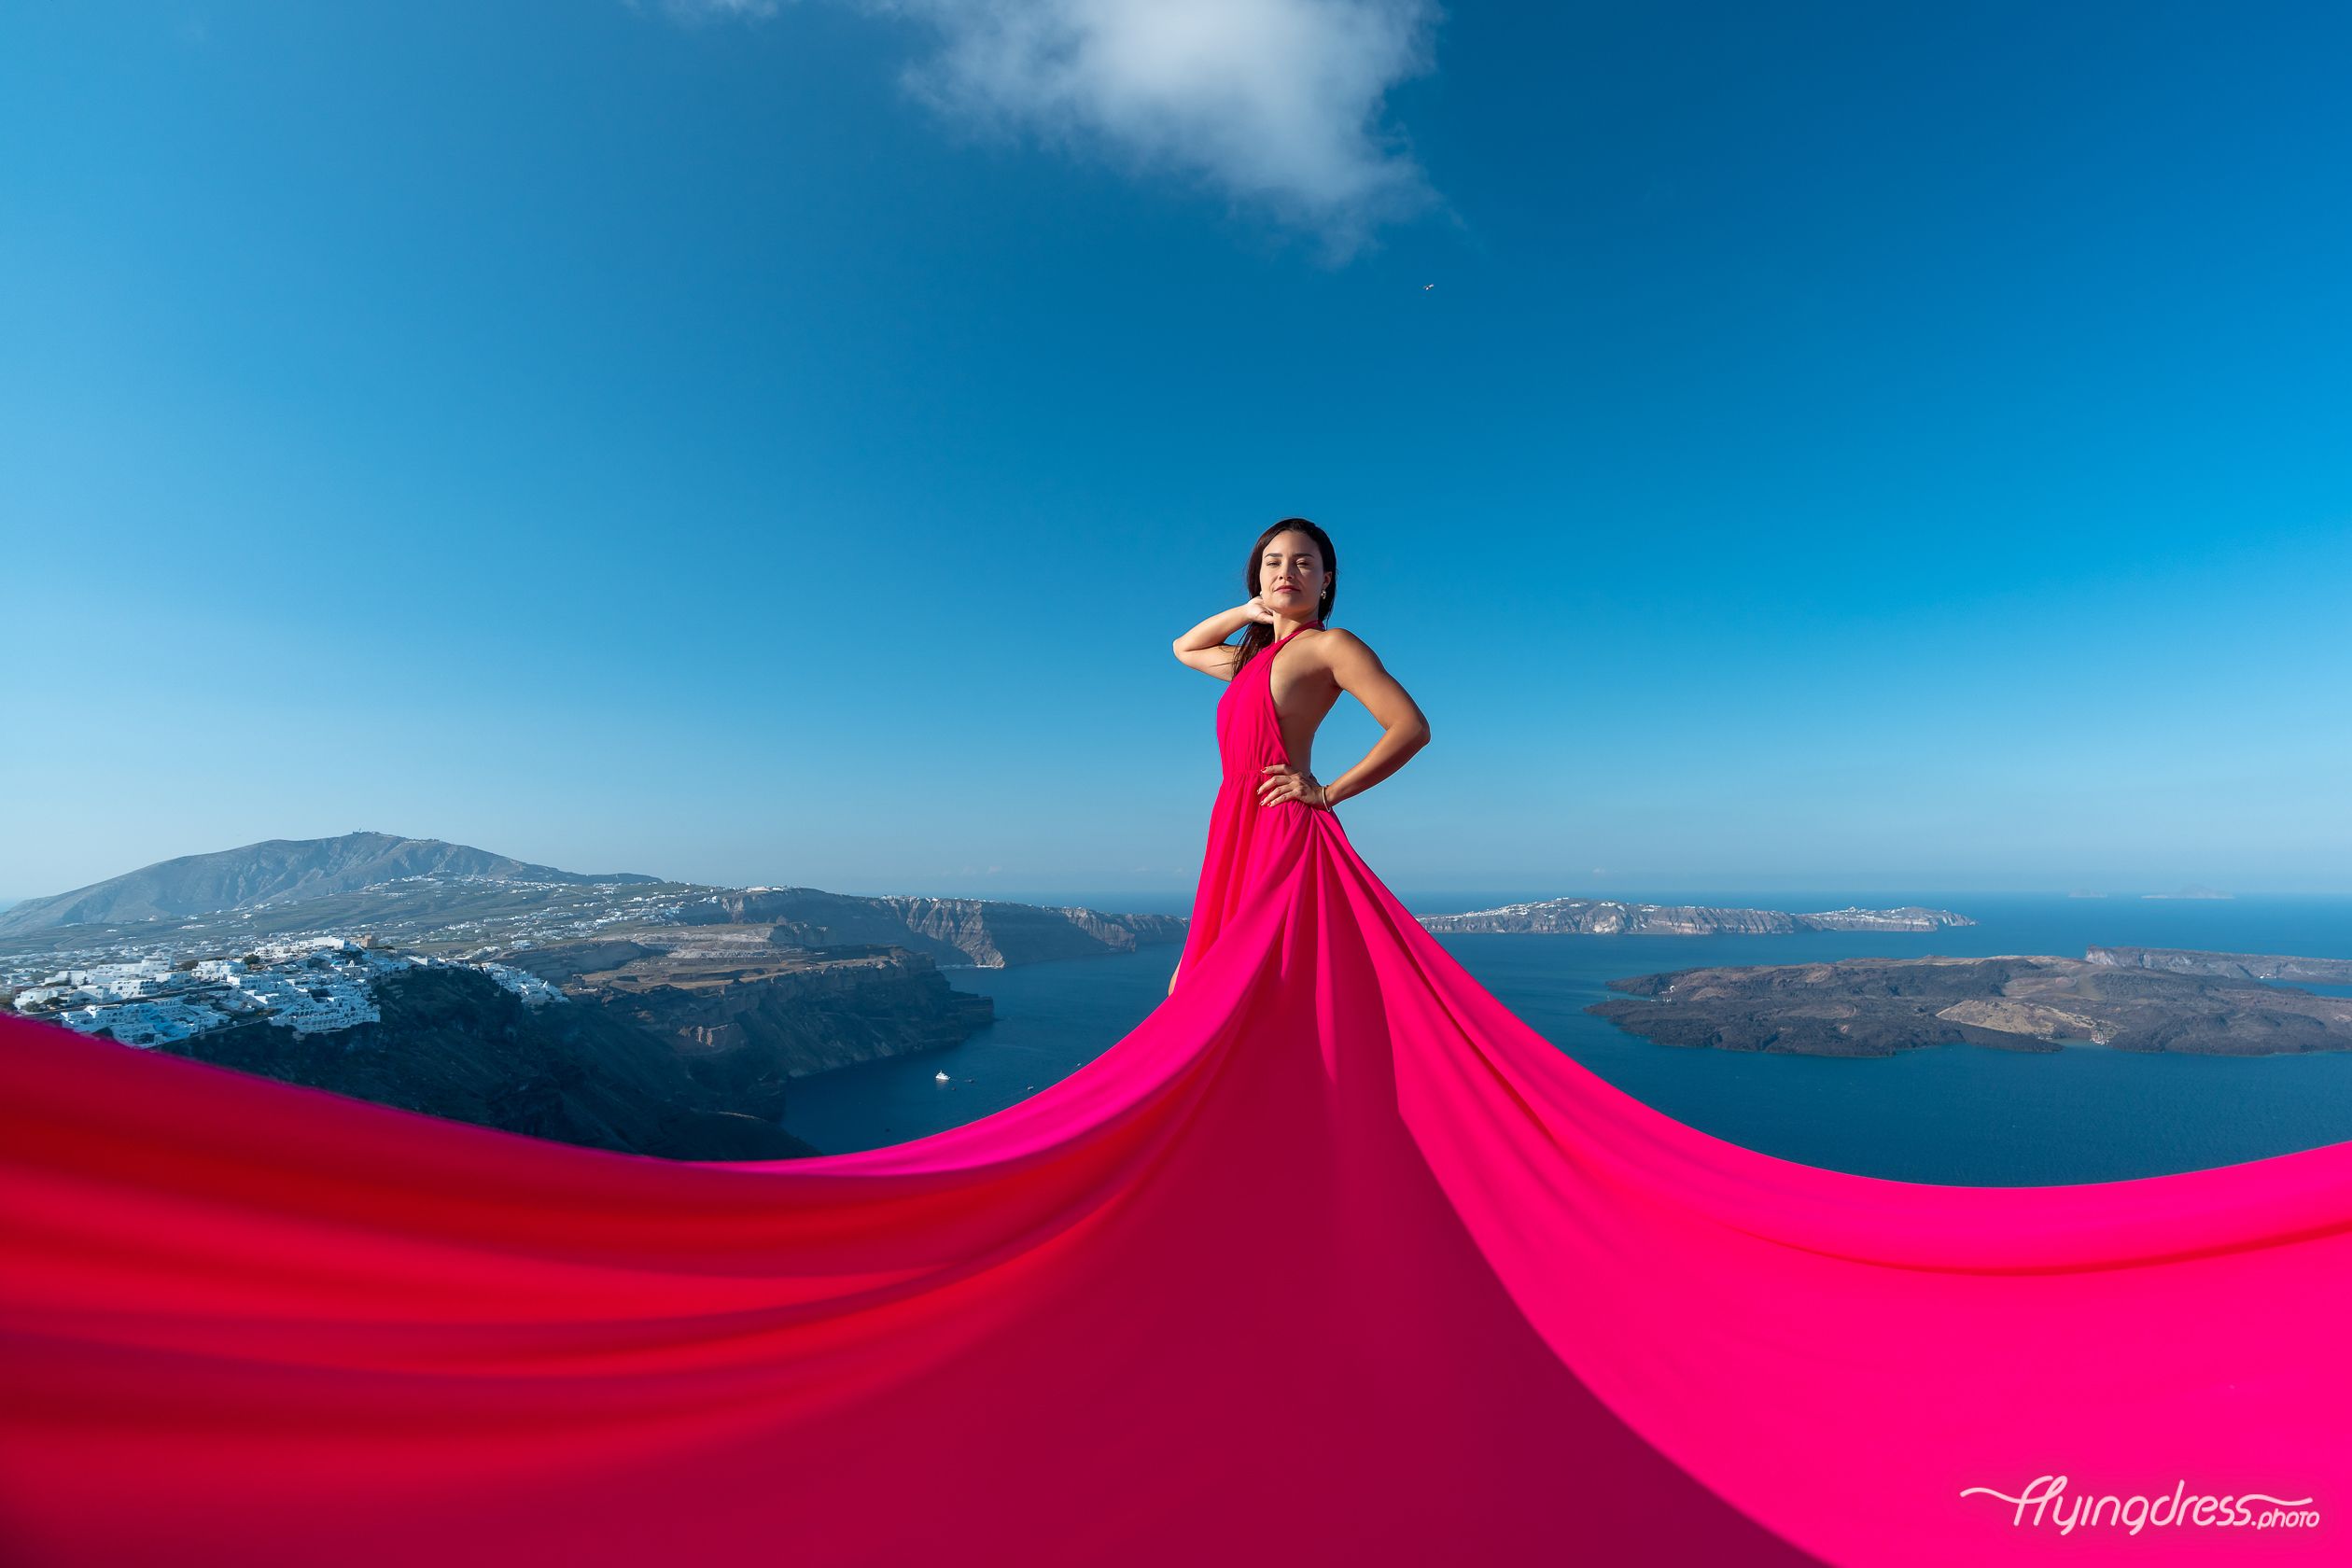 With a fuchsia pink flying dress, the lady enchants Santorini's vistas, her vibrant presence infusing the scene with a touch of whimsy and style.